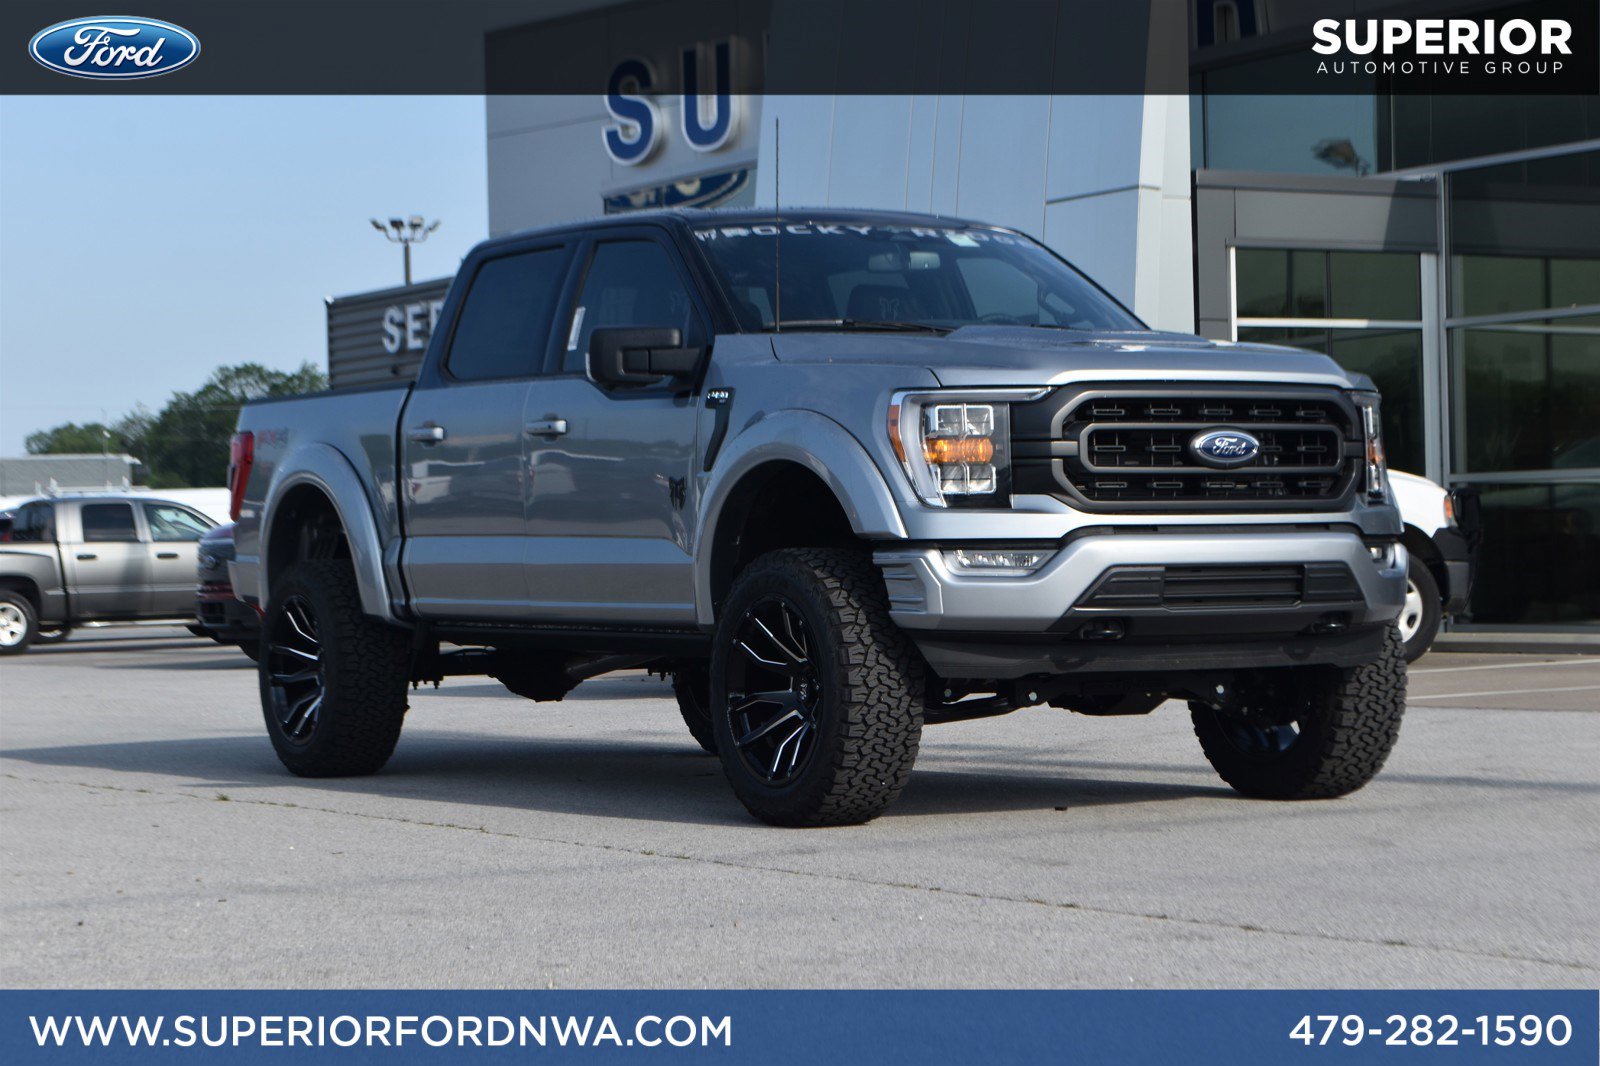 Ford F-150 Rocky Ridge Lifted Truck for sale in Siloam Springs,AR.